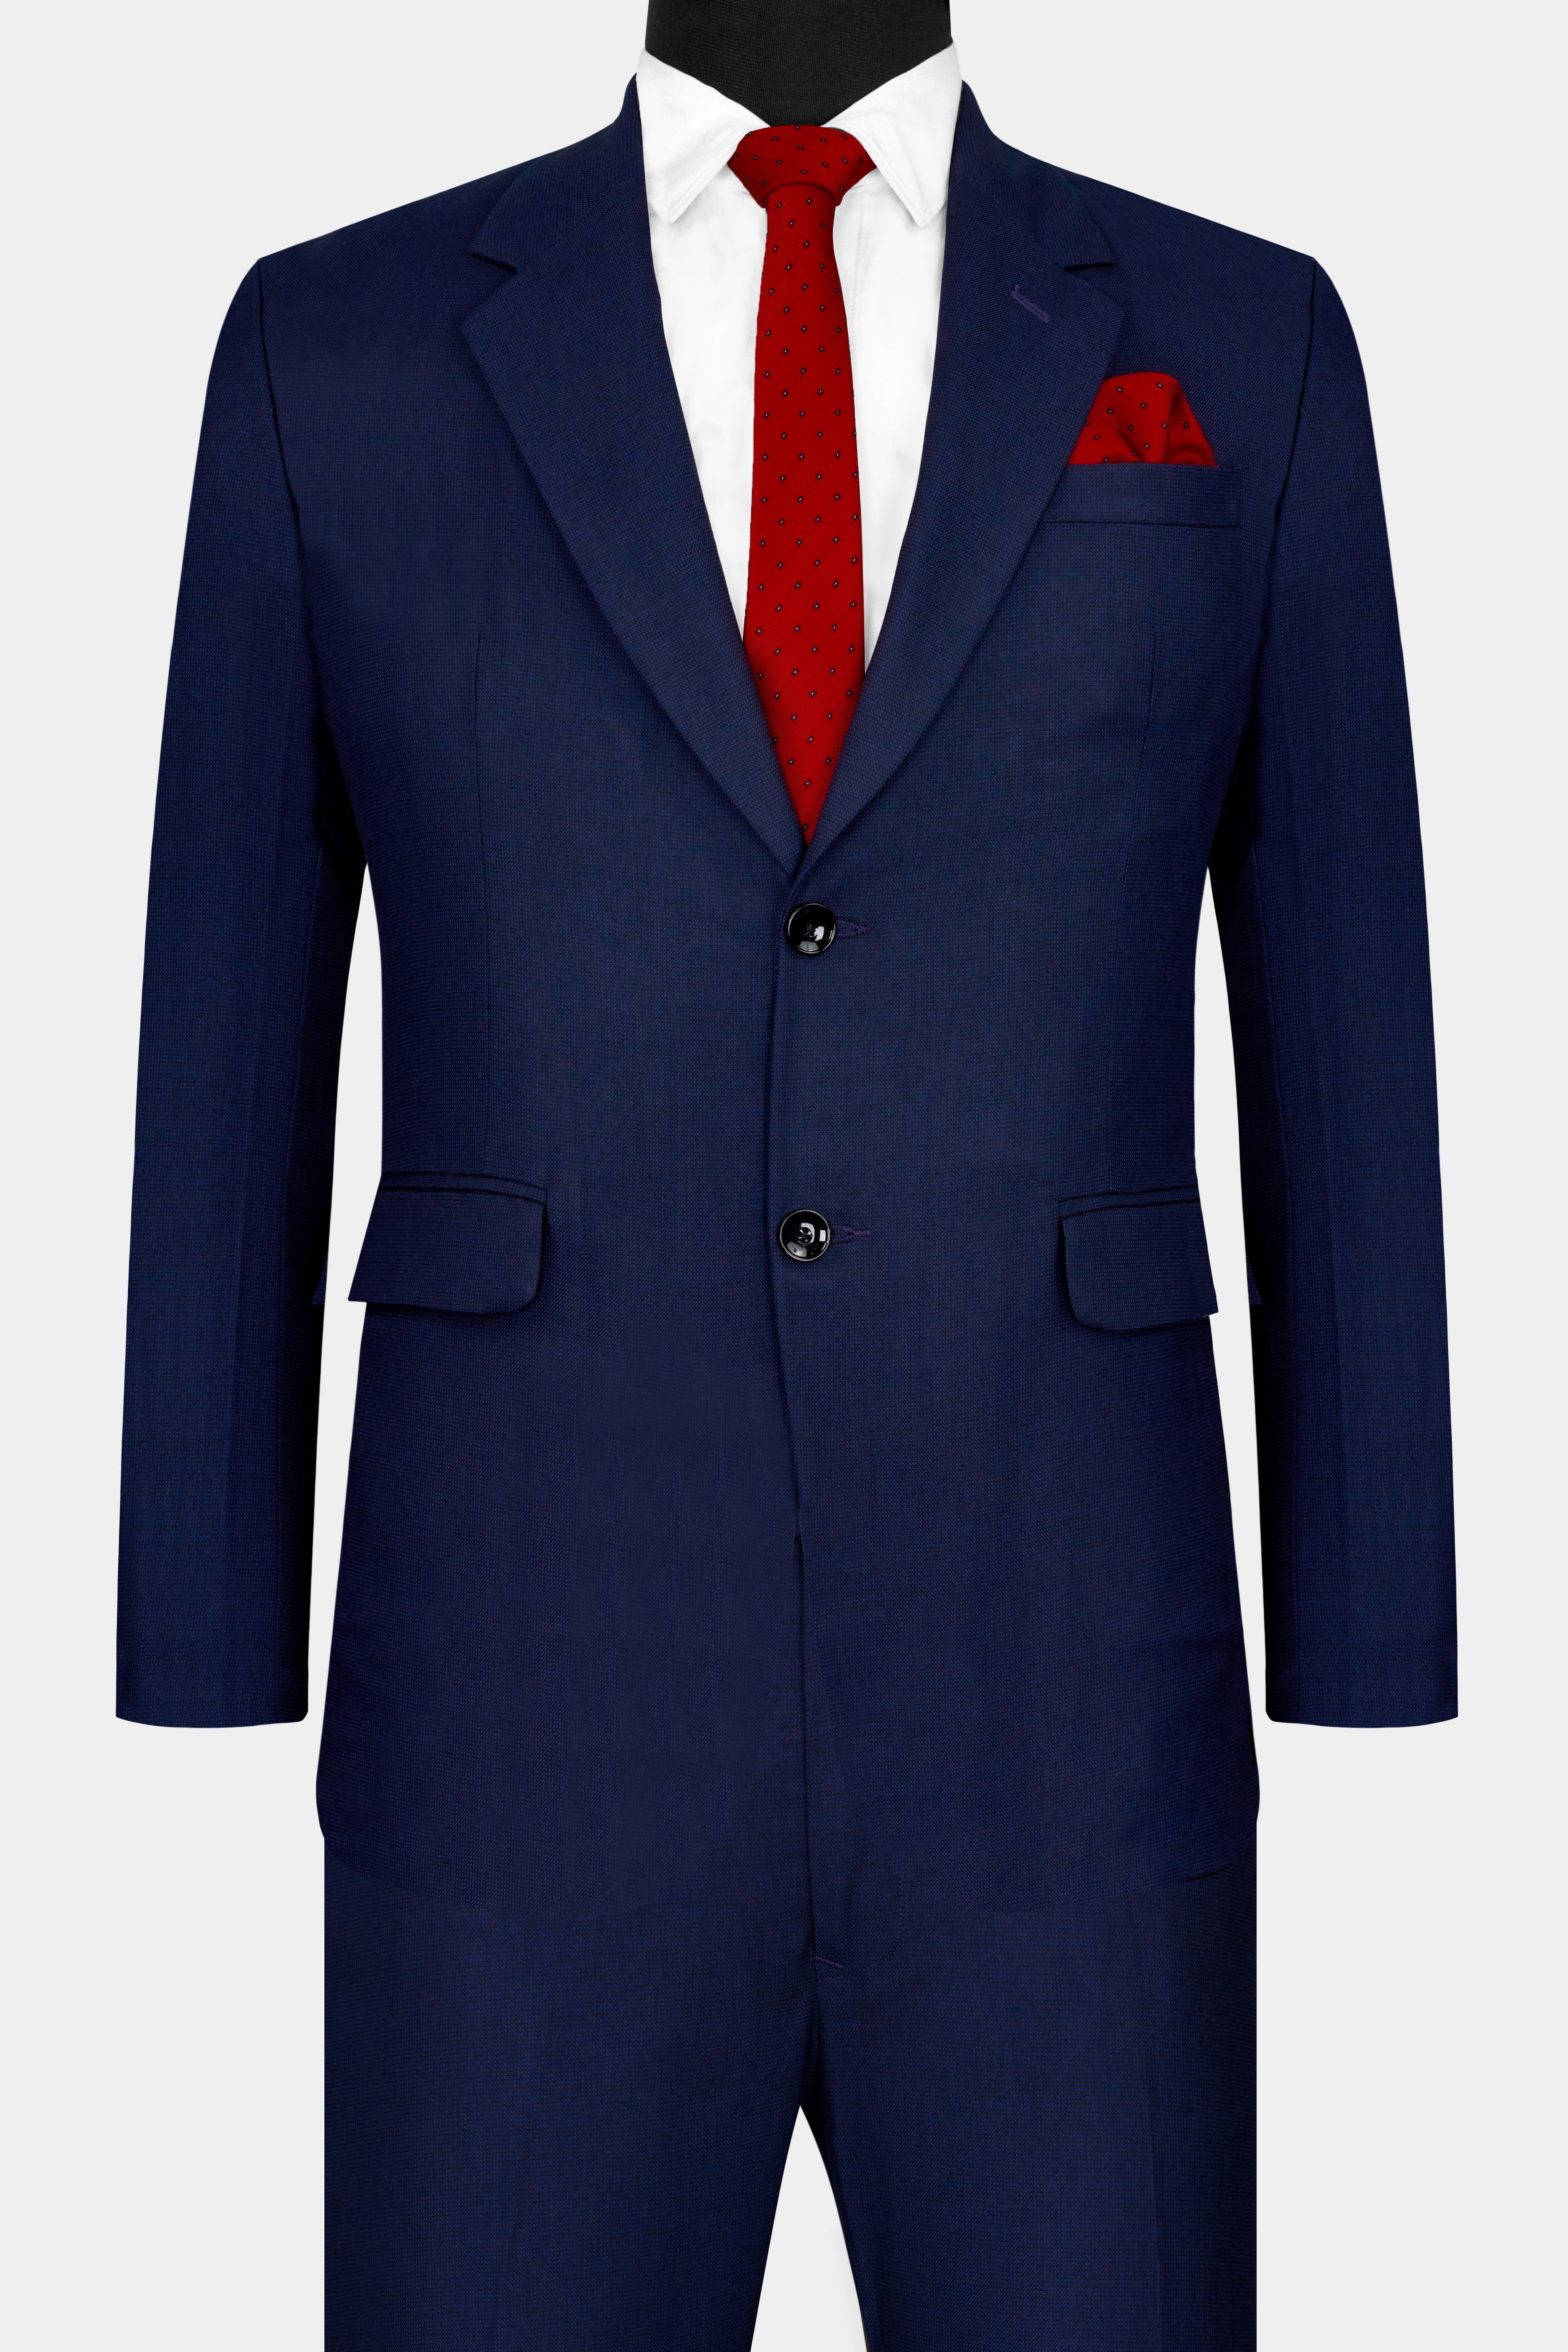 Midnight Navy Blue Wool Rich Single Breasted Suit ST2753-SB-36, ST2753-SB-38, ST2753-SB-40, ST2753-SB-42, ST2753-SB-44, ST2753-SB-46, ST2753-SB-48, ST2753-SB-50, ST2753-SB-52, ST2753-SB-54, ST2753-SB-56, ST2753-SB-58, ST2753-SB-60